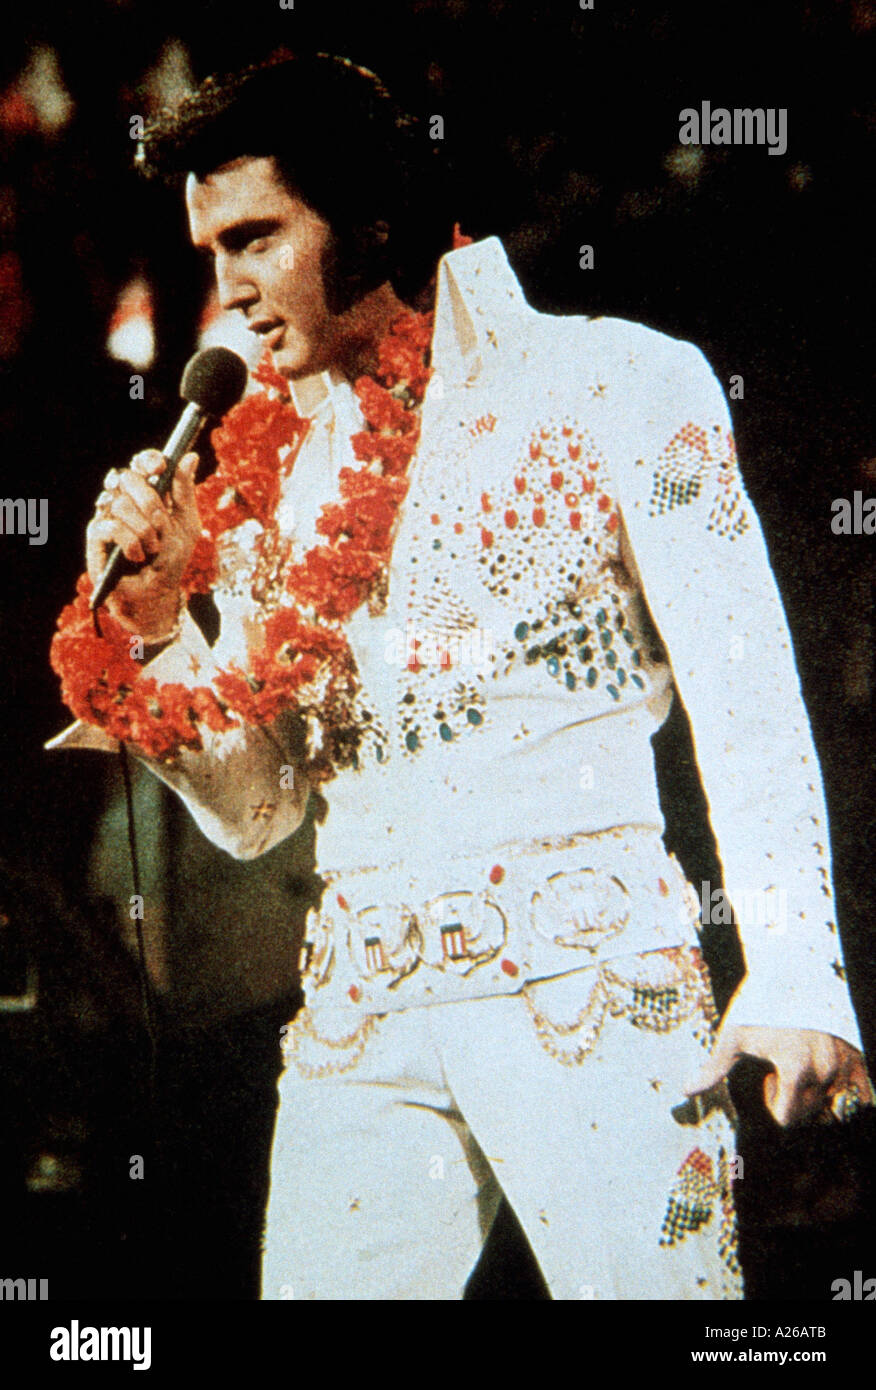 Calling All Elvis Impersonators! Elvis Presley's Jumpsuit and Cape Has Sold  at Auction